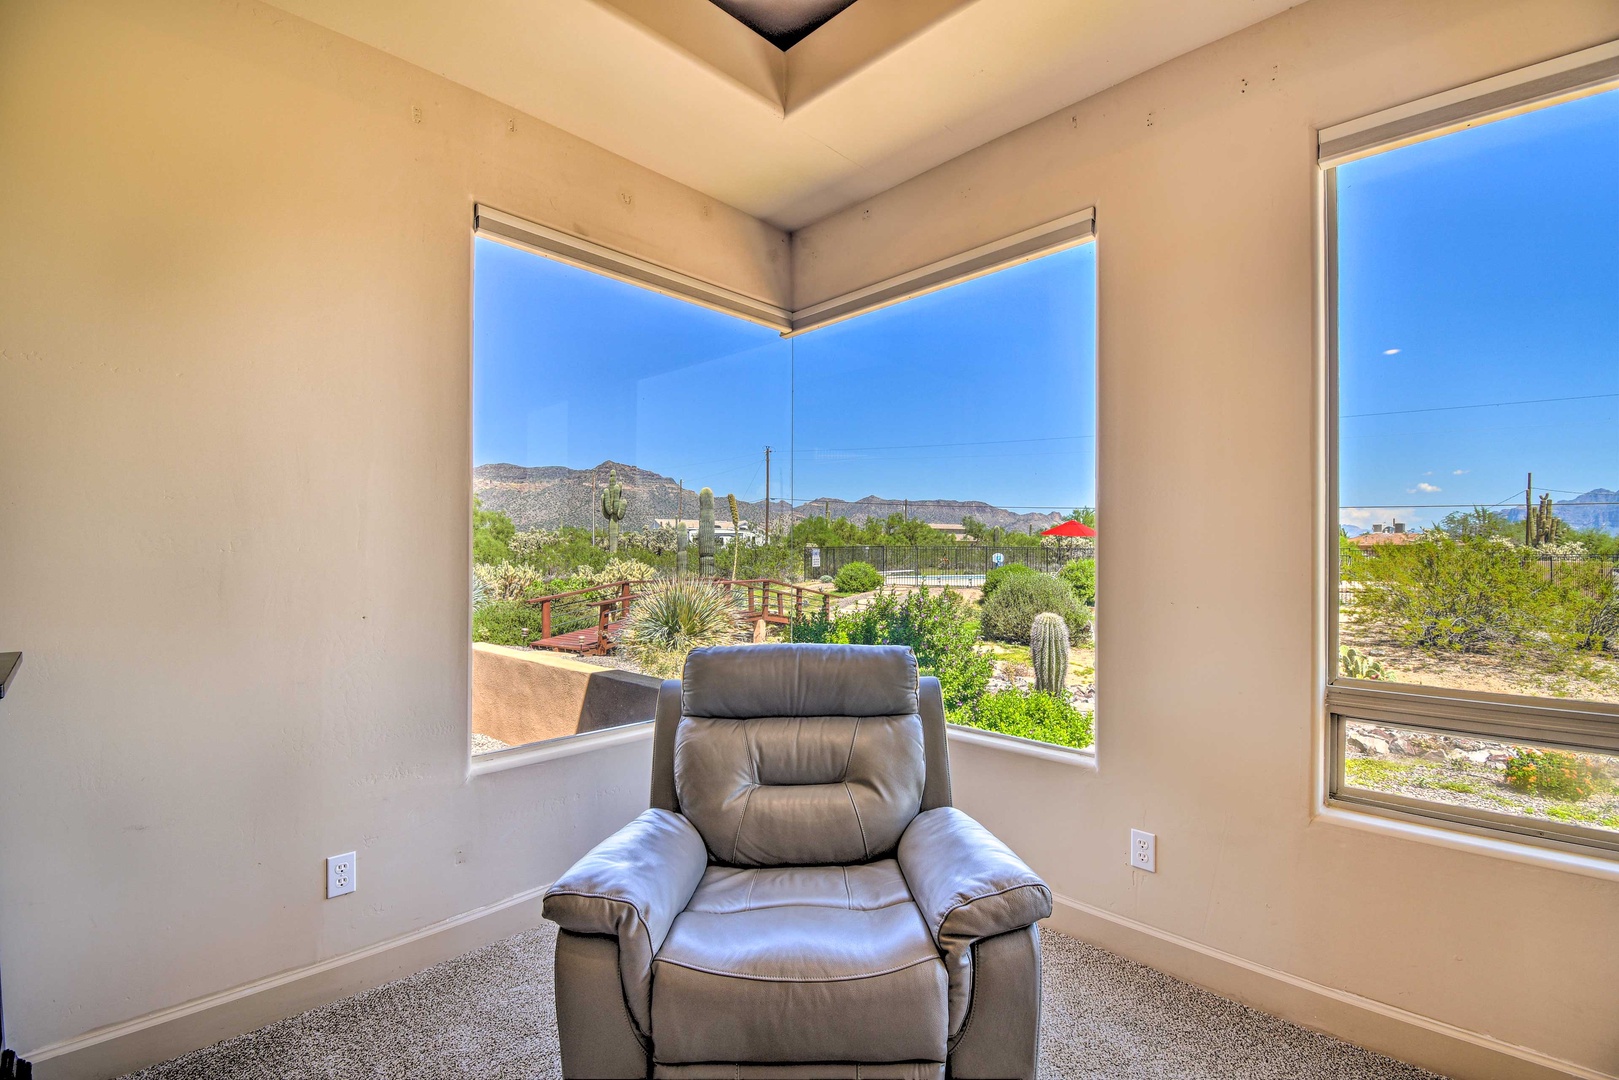 The primary king suite boasts mountain views, a private ensuite, & Smart TV